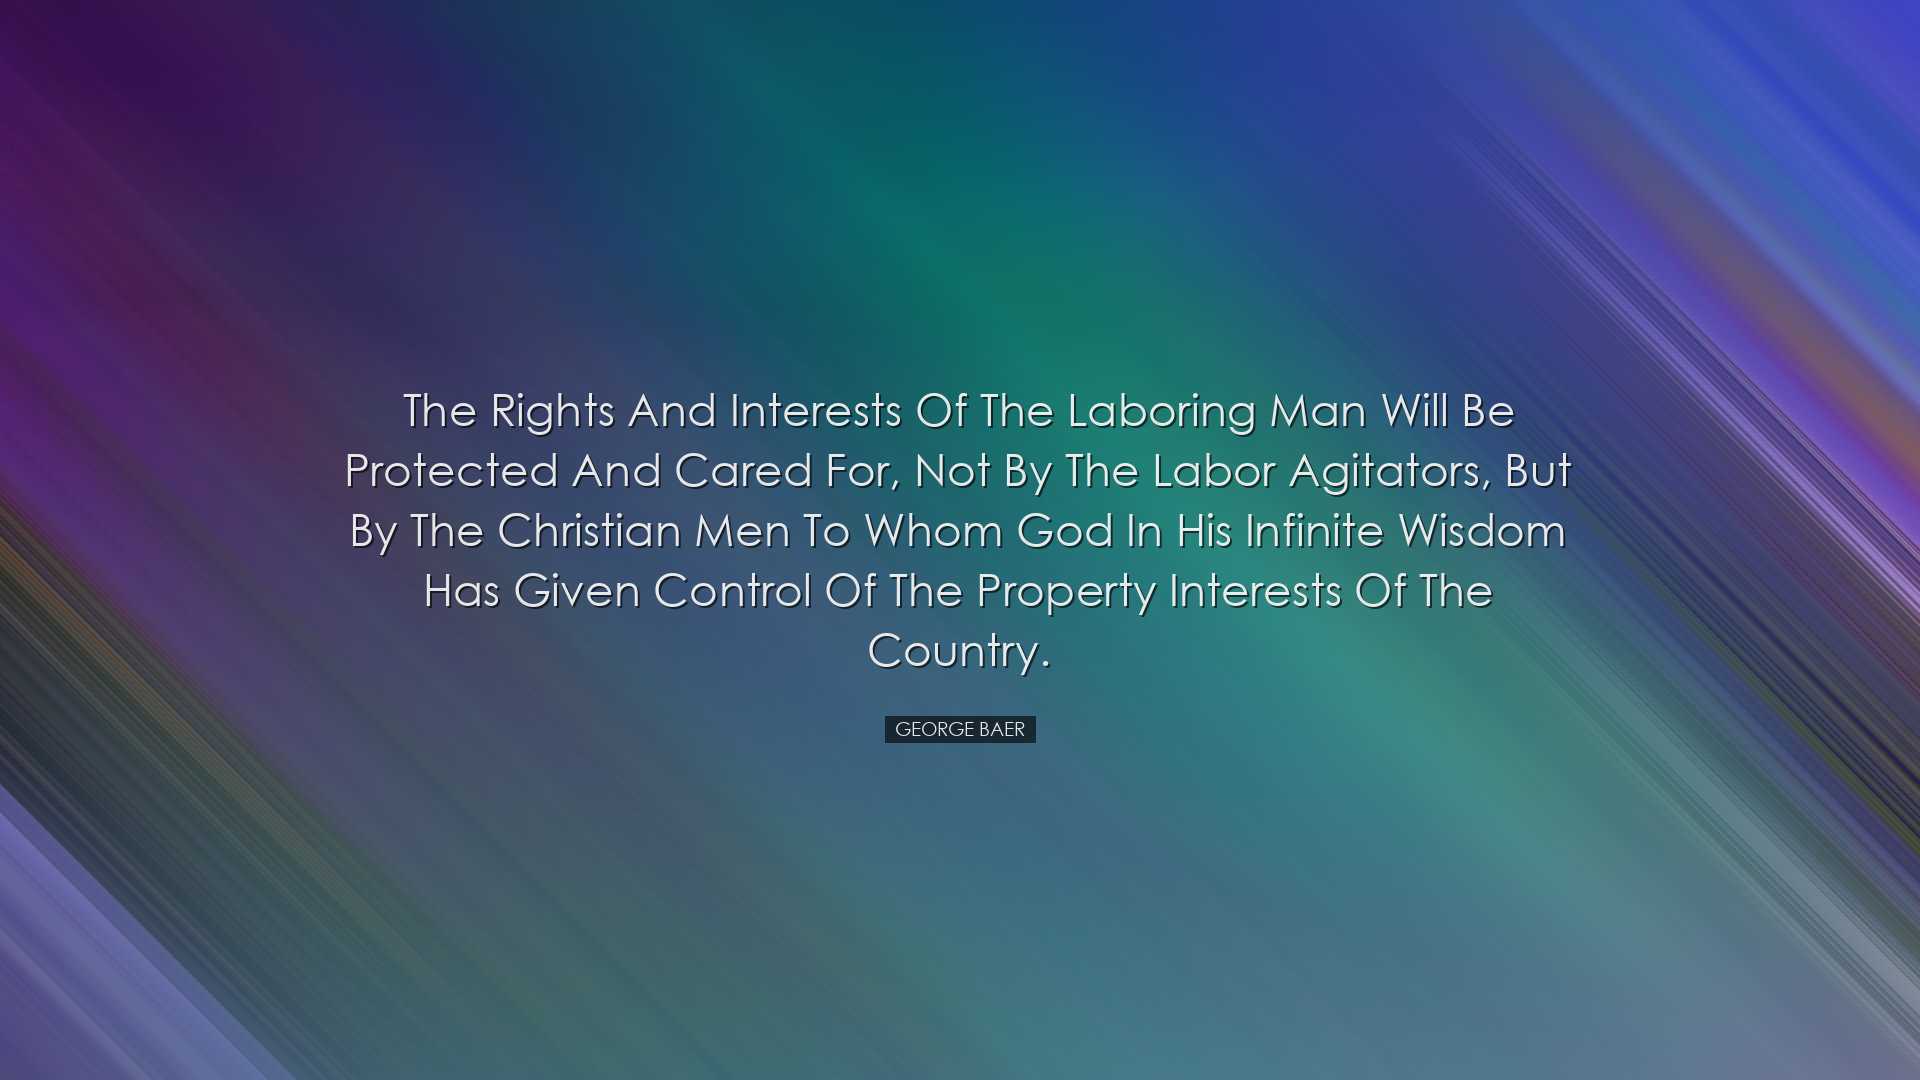 The rights and interests of the laboring man will be protected and